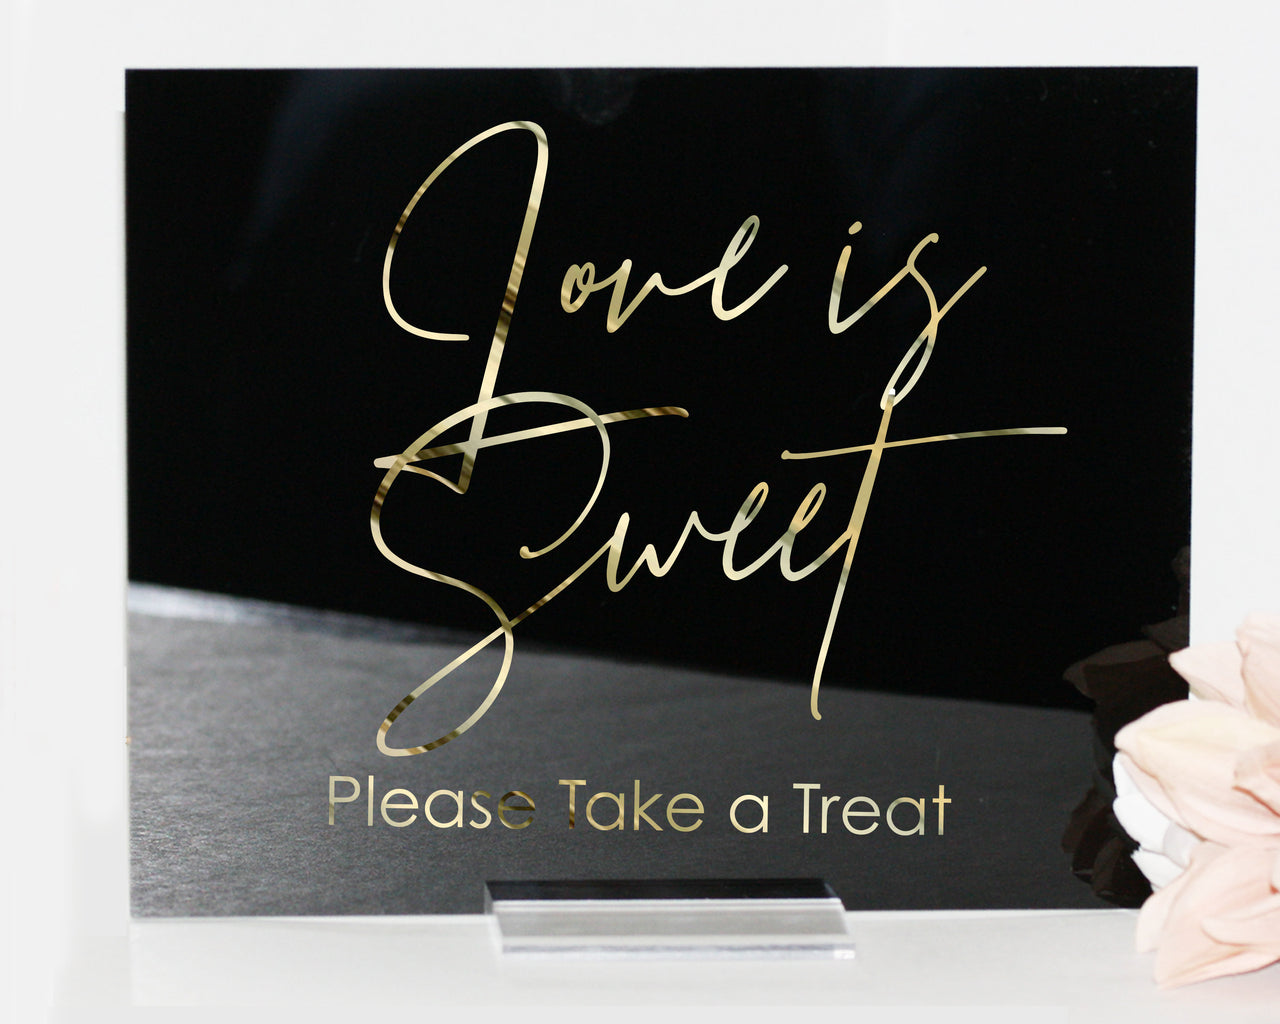 Love is Sweet Please Take a Treat acrylic sign acrylic wedding sign acrylic signs custom dessert table sign favors  clear lucite - RS26AS